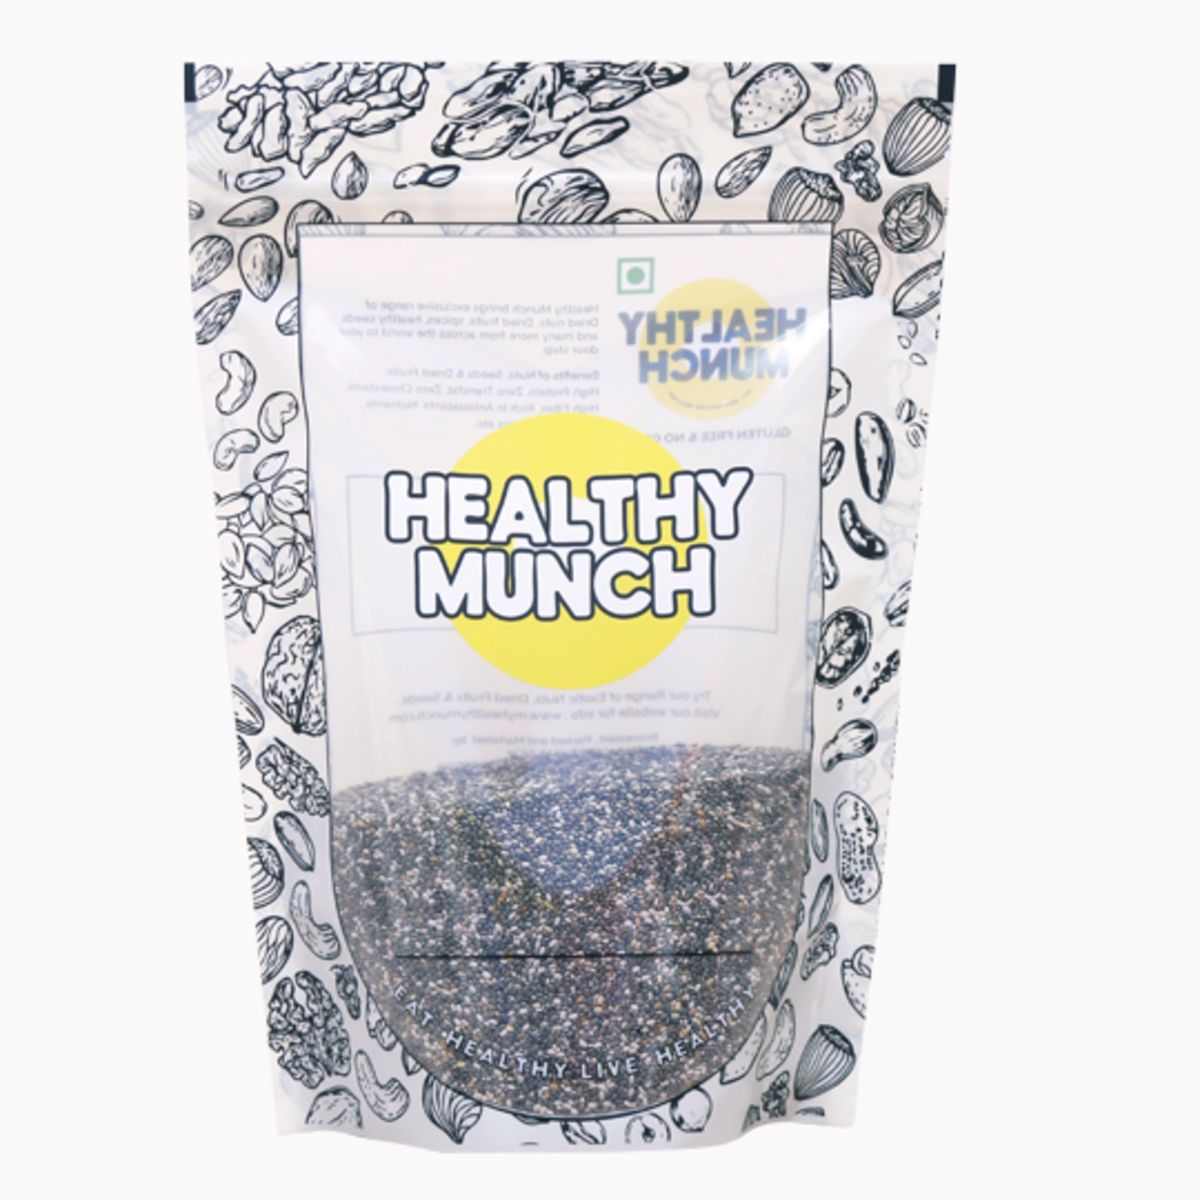 Buy Healthy Munch Chia Seeds 250 gms at Best Price Online